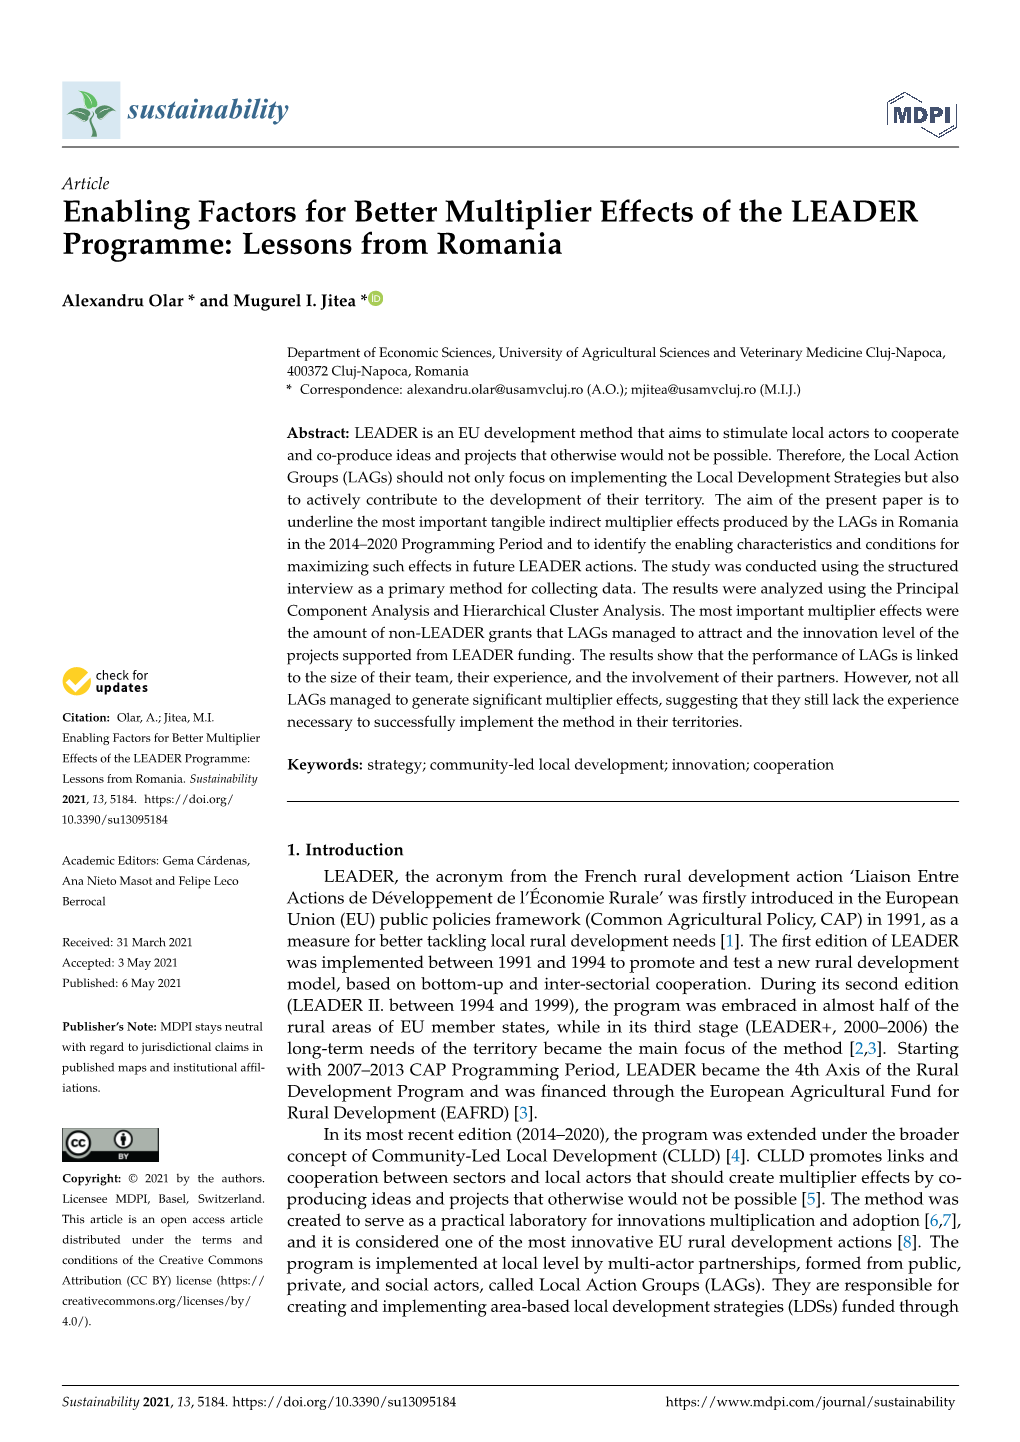 Enabling Factors for Better Multiplier Effects of the LEADER Programme: Lessons from Romania